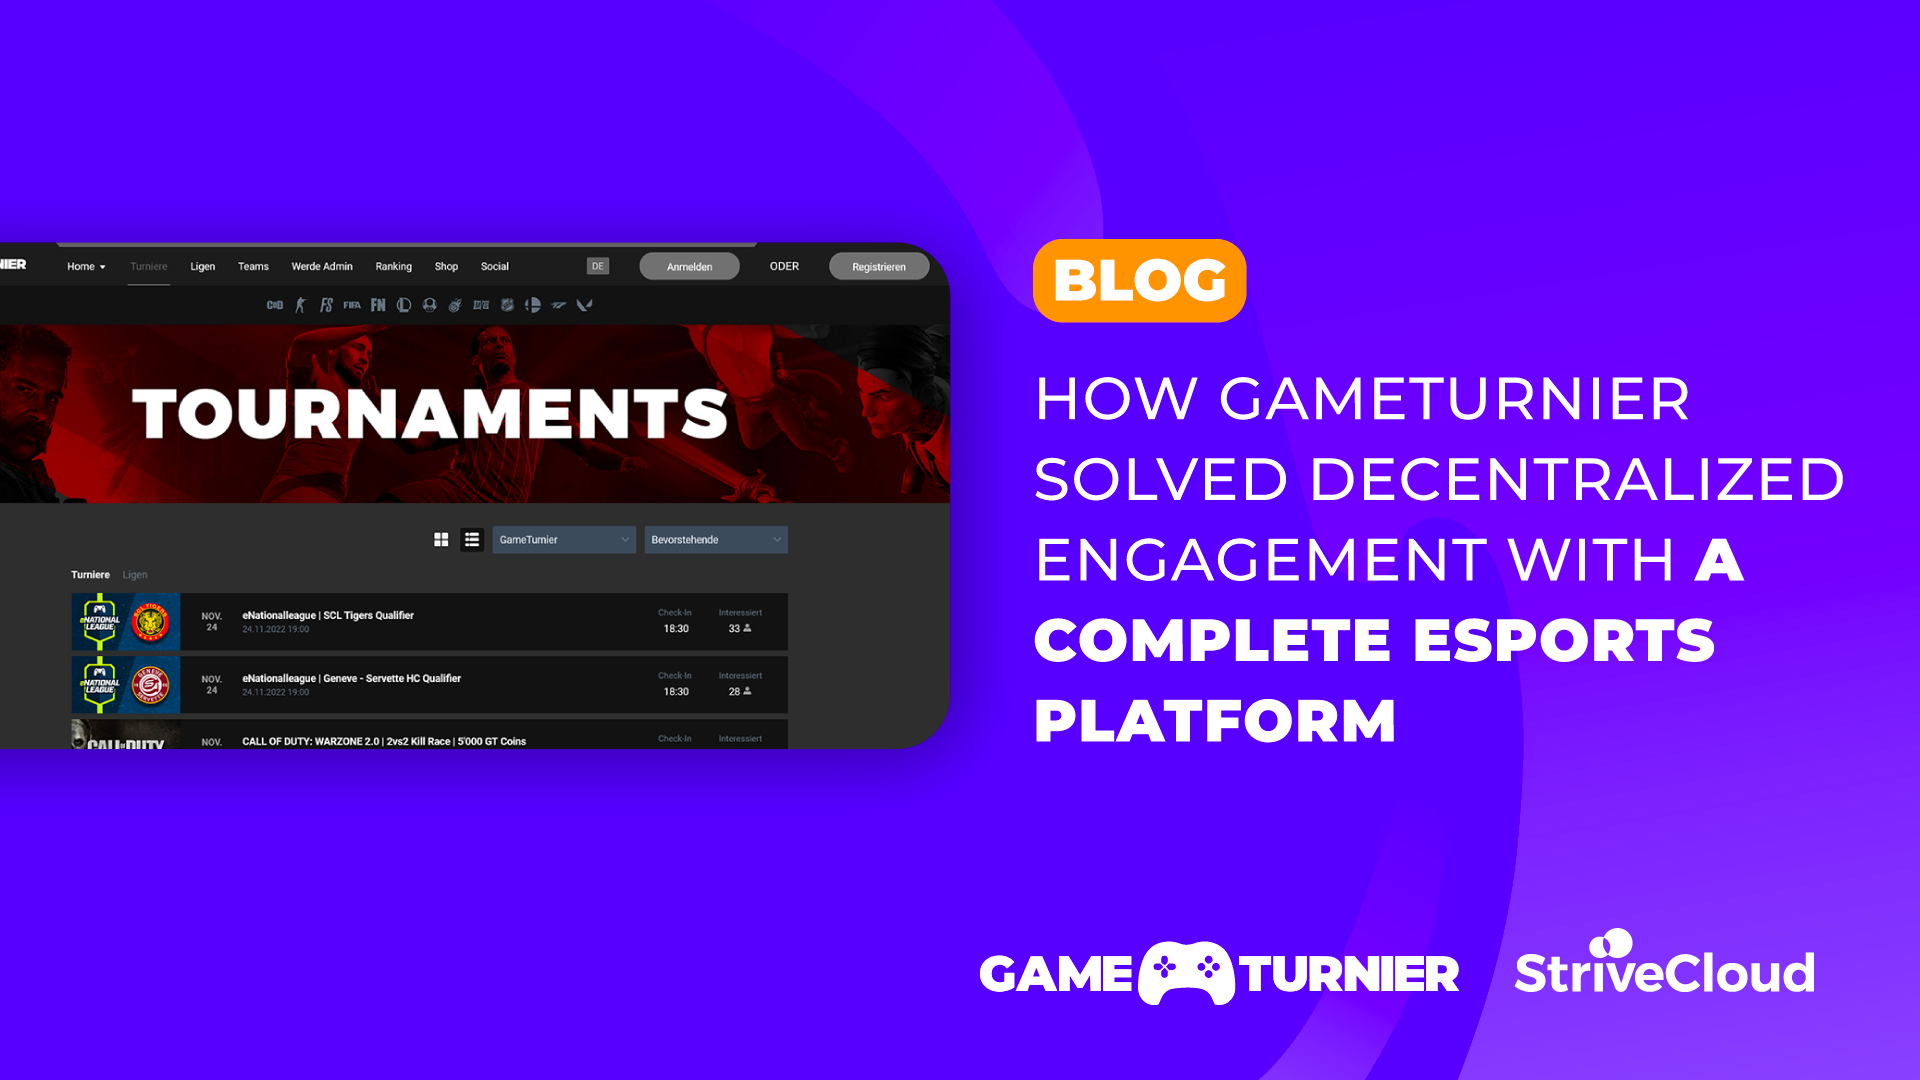 How GameTurnier solved decentralized engagement with a complete esports platform